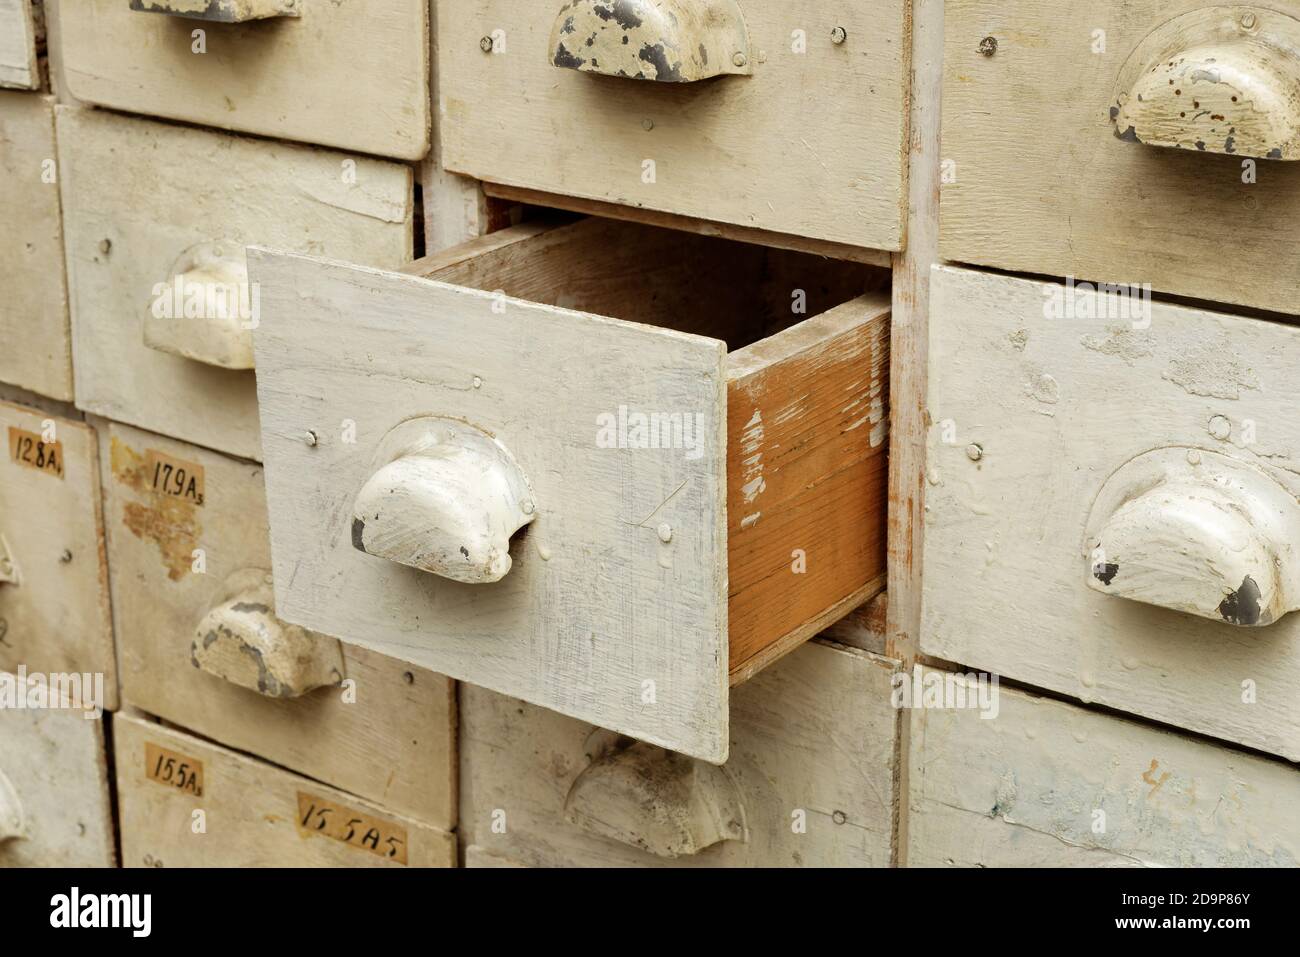 Backgrounds and textures: old wooden cabinet with drawers, one drawer opened, close-up shot Stock Photo